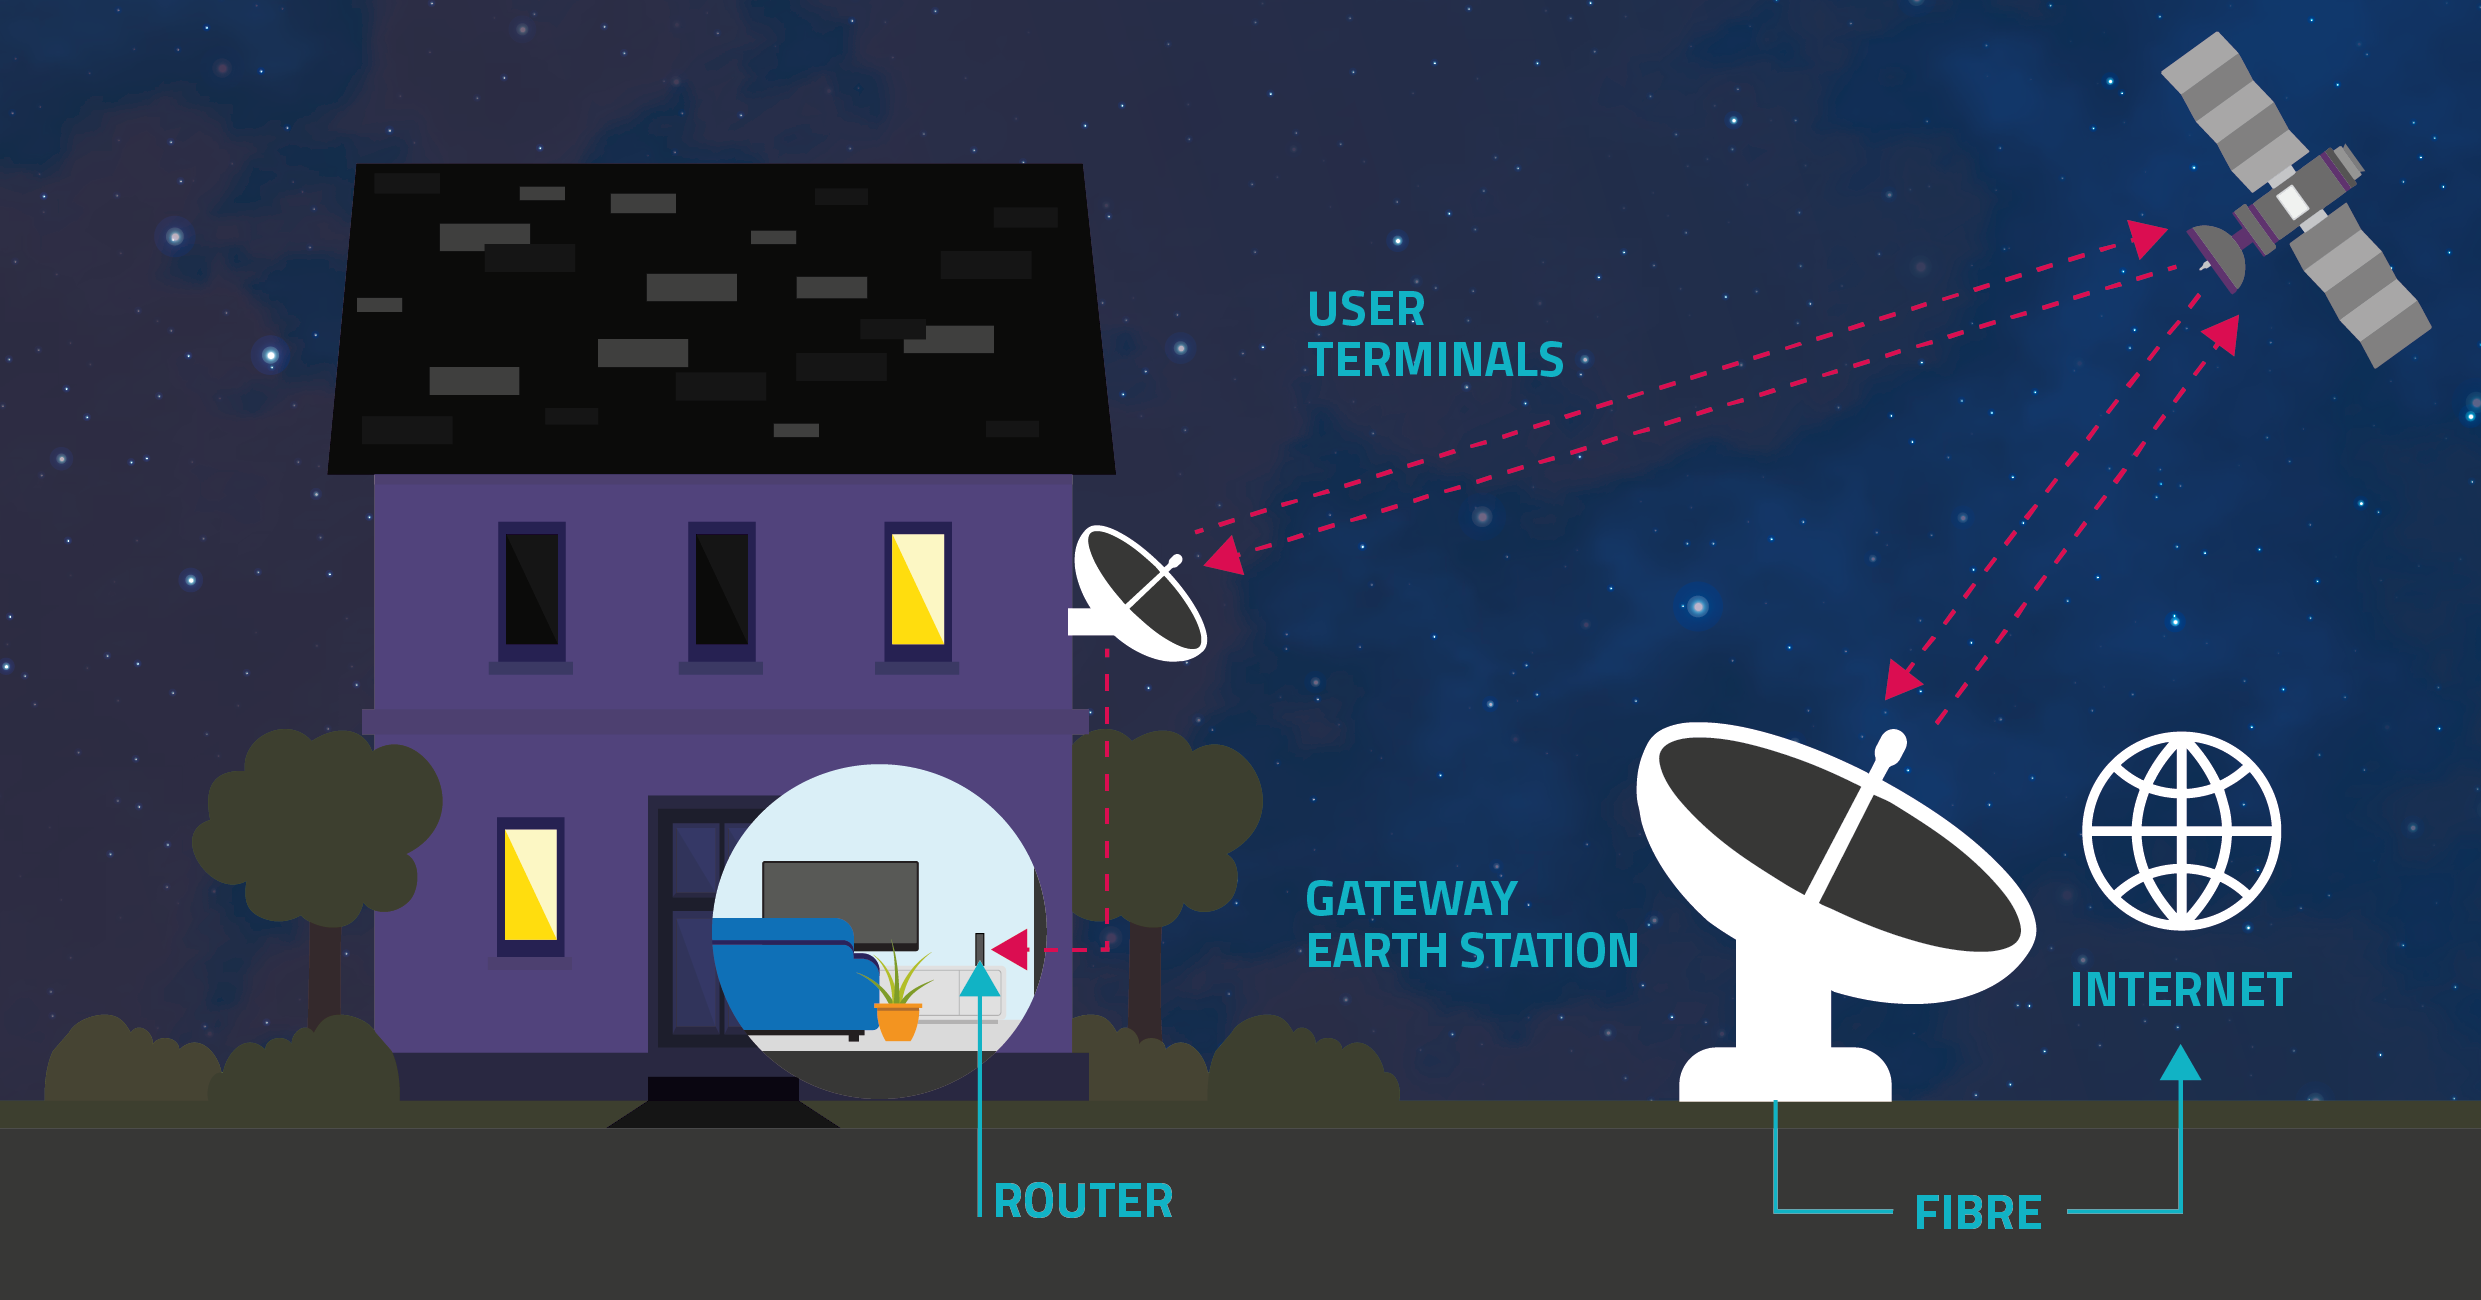 A gateway earth station (connected to the internet) tracks a non-geostationary orbit satellite as it moves across the sky. The satellite relays data to a user terminal (a dish fixed to the side of a house), which in turn is connected to a router.